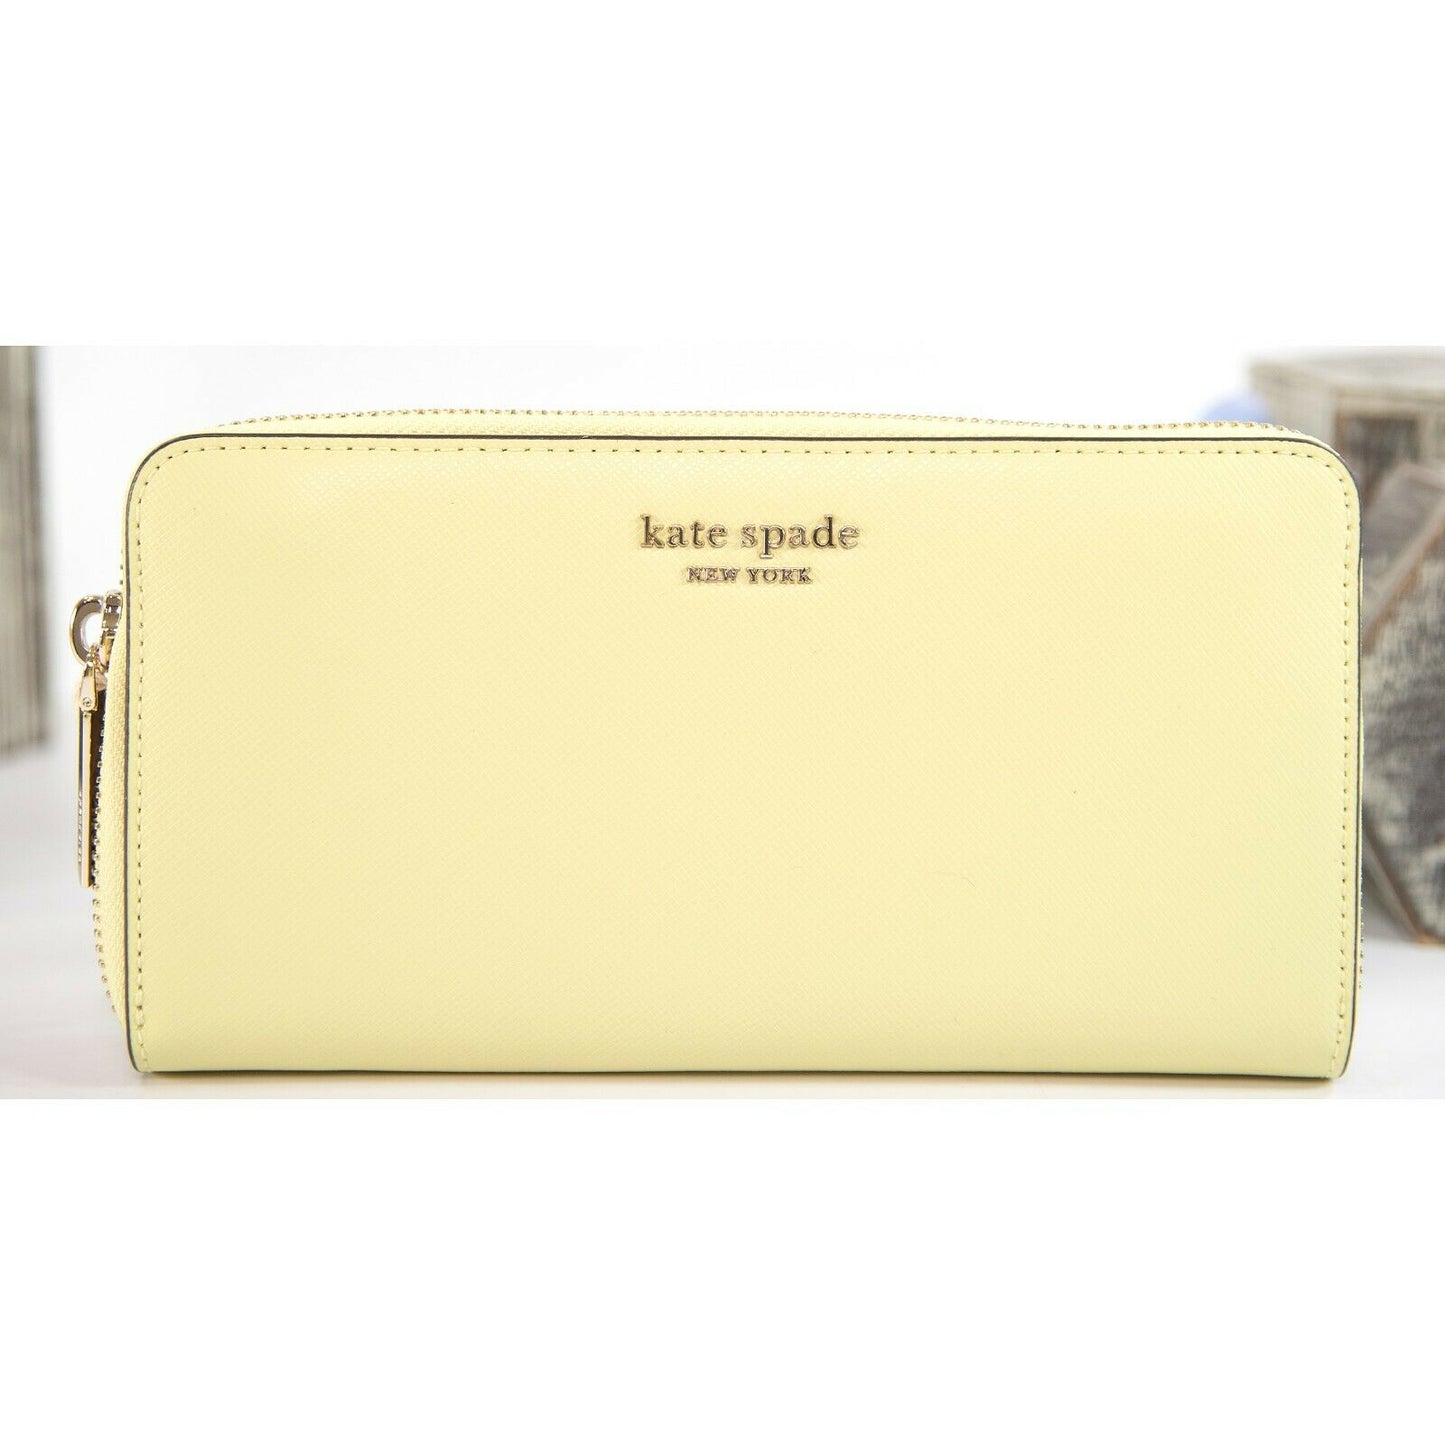 Kate Spade Acid Green Leather Spencer Zip Around Lacey Wallet NWOT